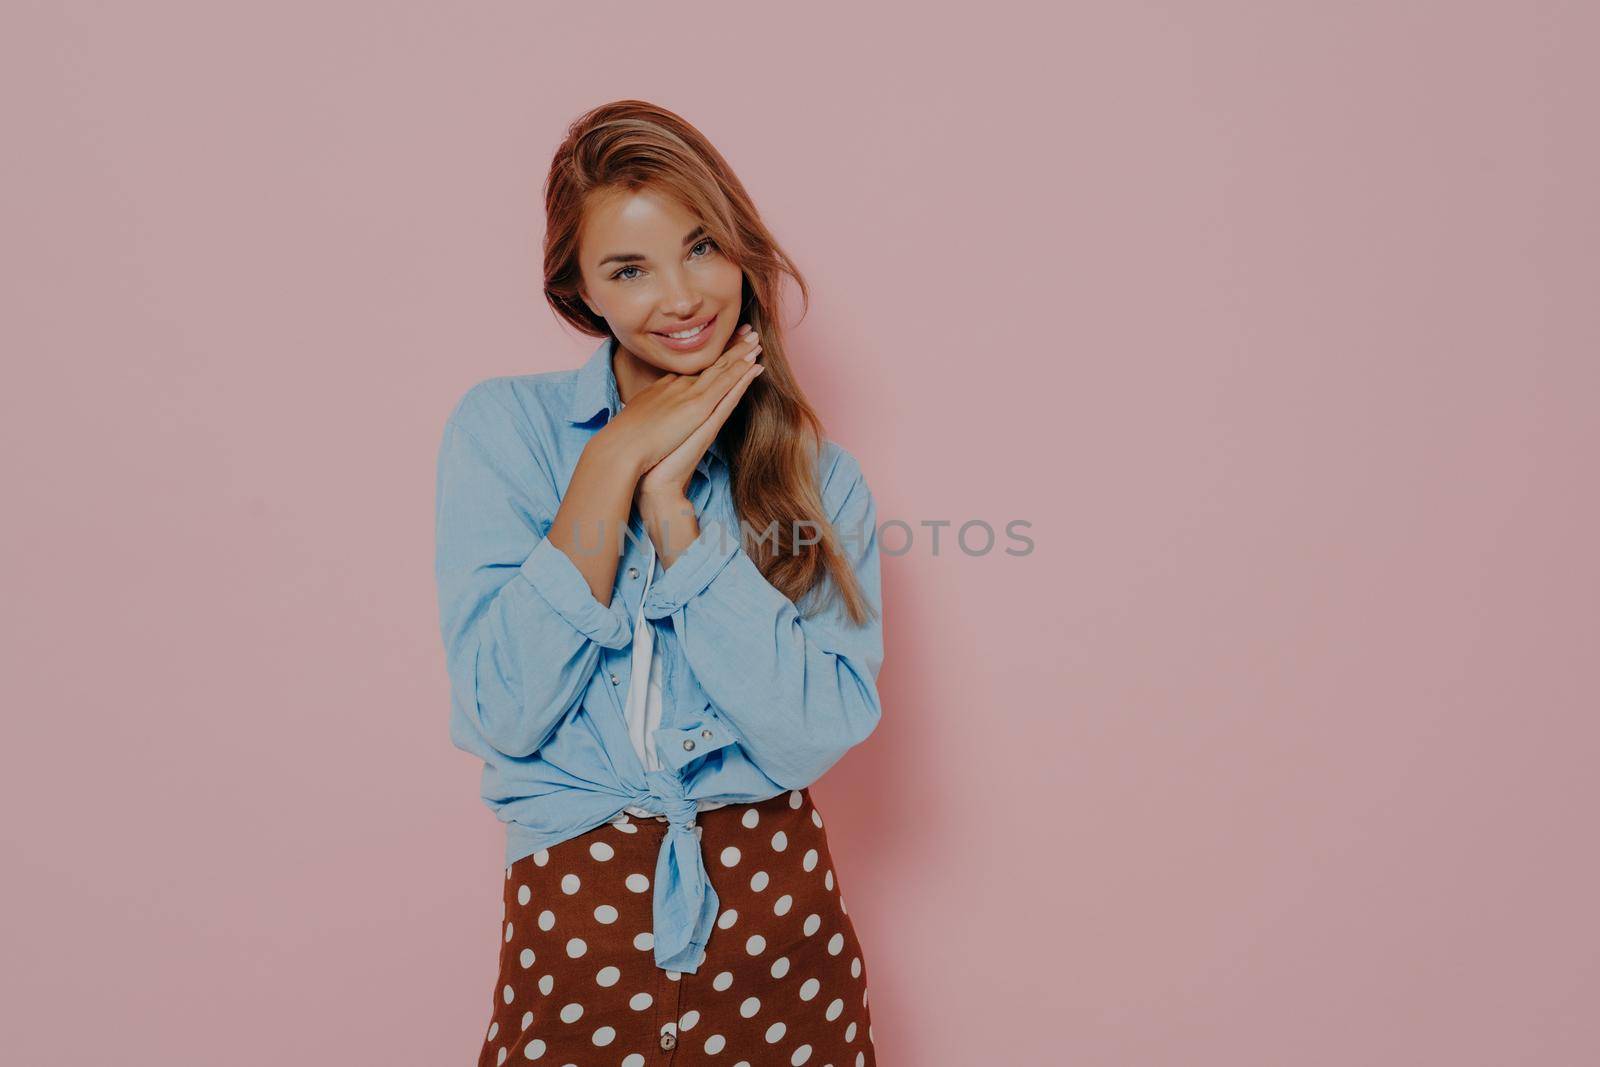 Attractive young woman in stylish outfit with beautiful sincere smile feeling love and cuteness, being shy and innocently looking at camera while standing against pink background